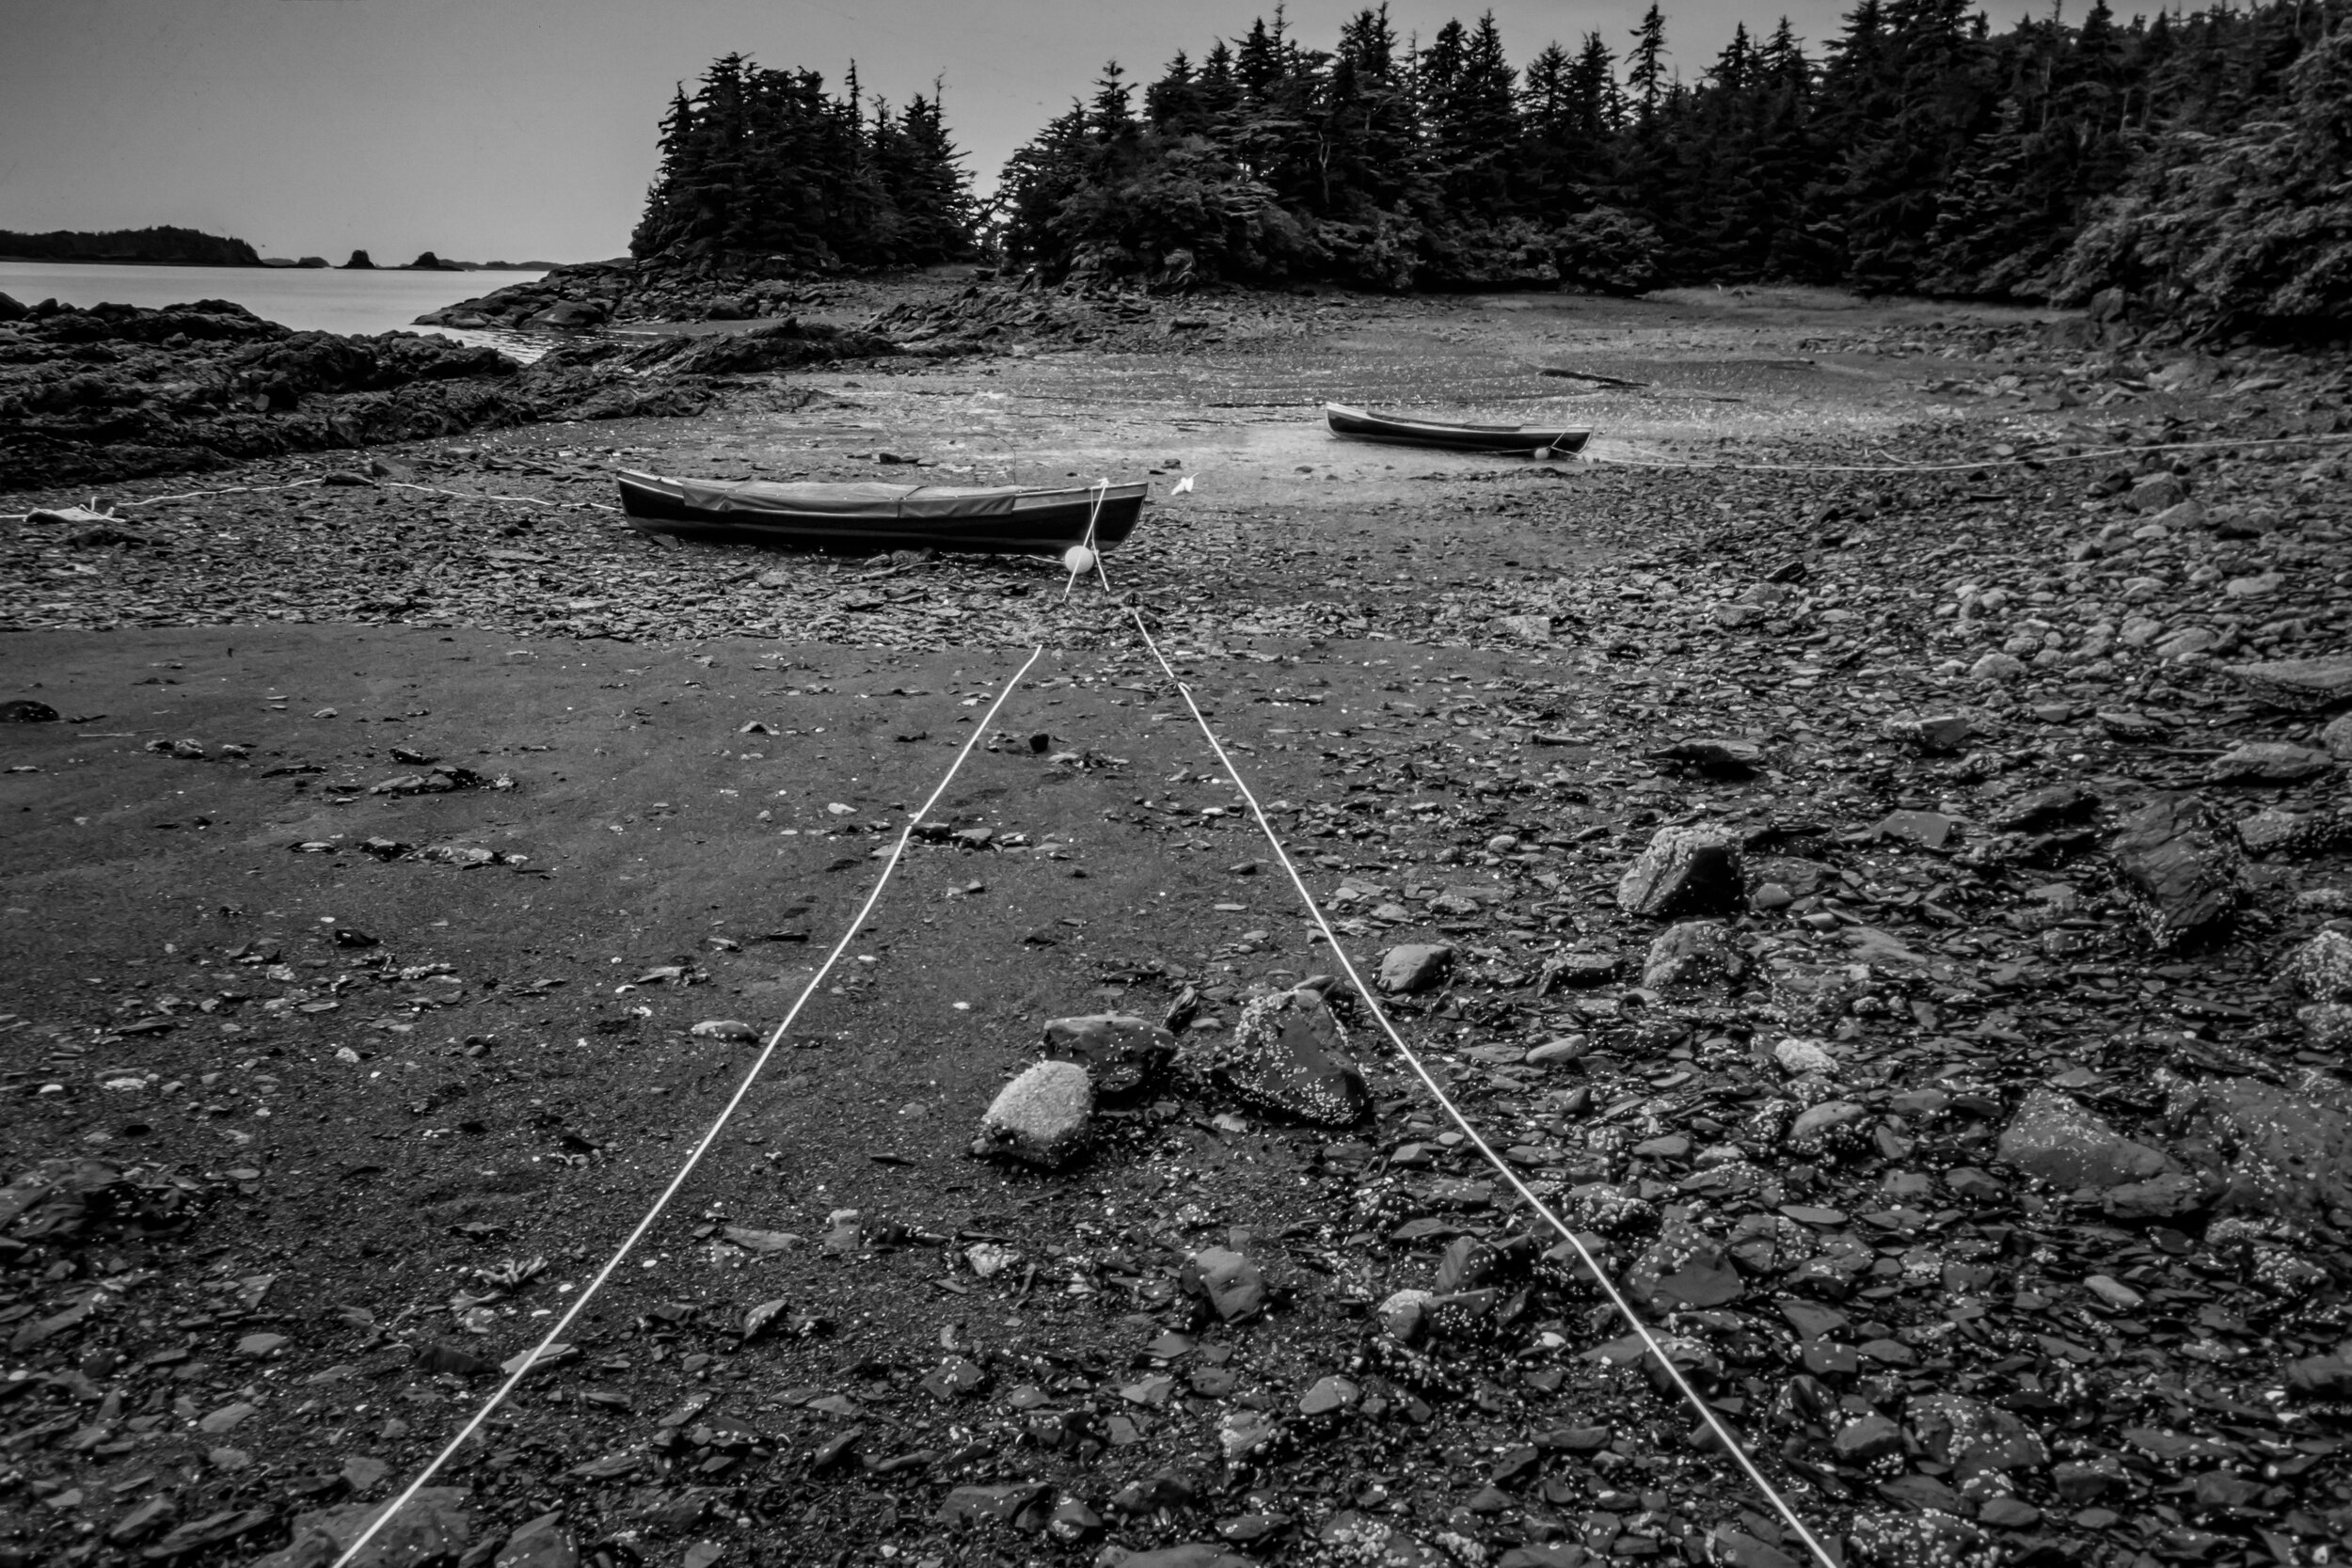  While we always consulted tide charts when setting up our mooring lines at night, sometimes we mis-calculated the depth of the water we were in! Our boats high and dry at morning low tide.  